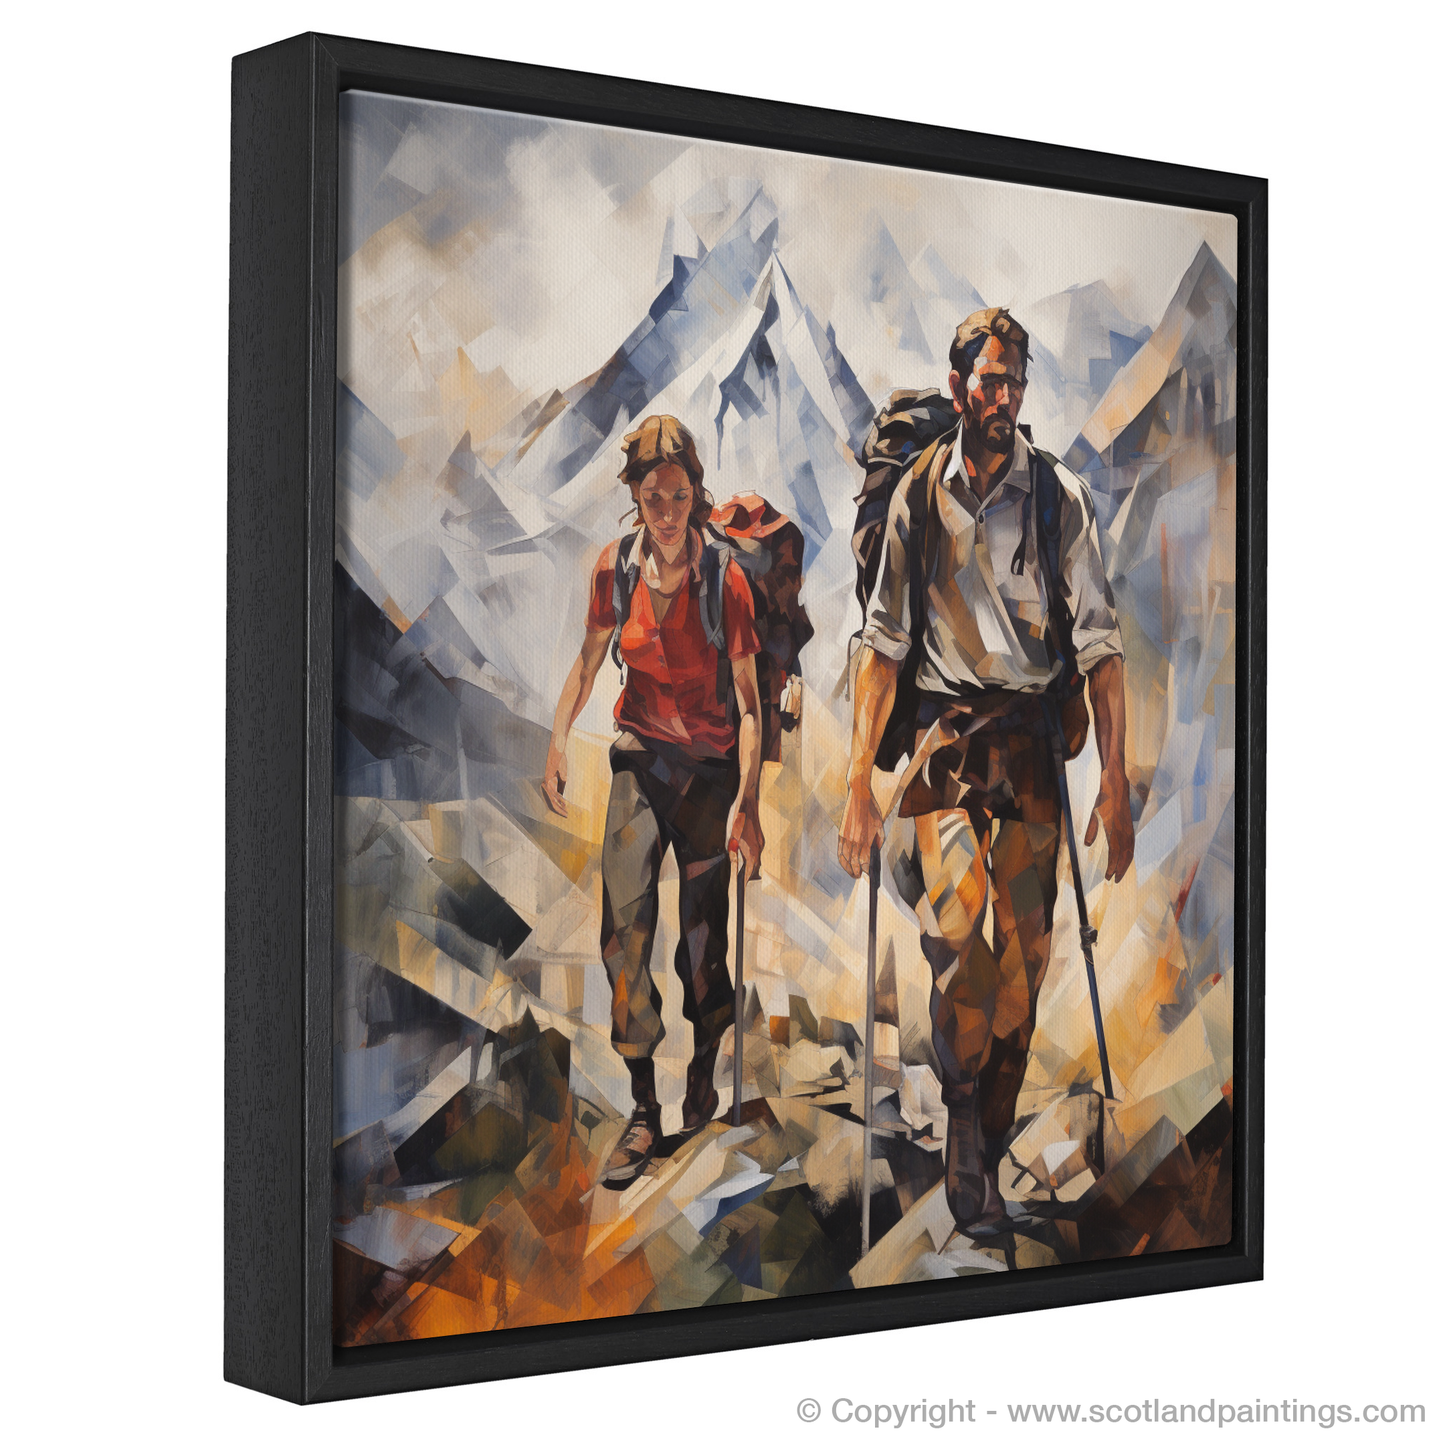 Painting and Art Print of Hikers in Glencoe entitled "Hikers Triumph in the Heart of Glencoe".